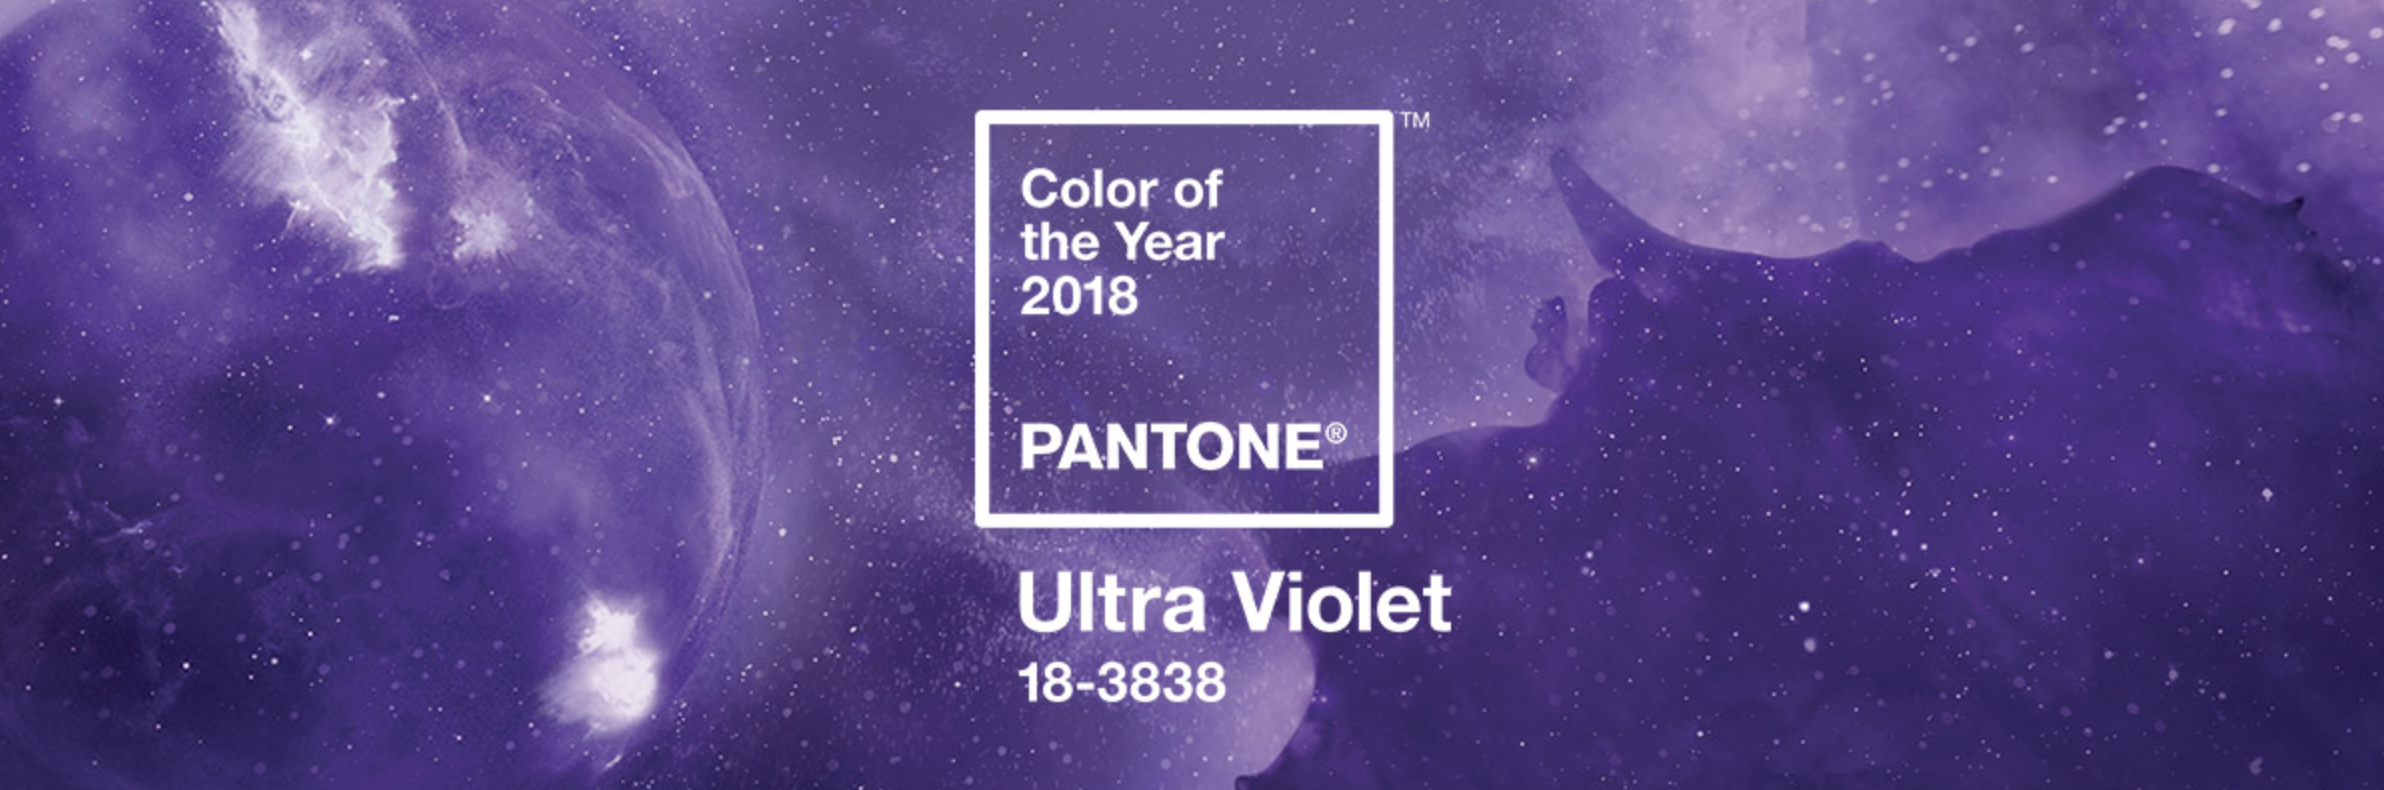 Pantone's color of the year 2018